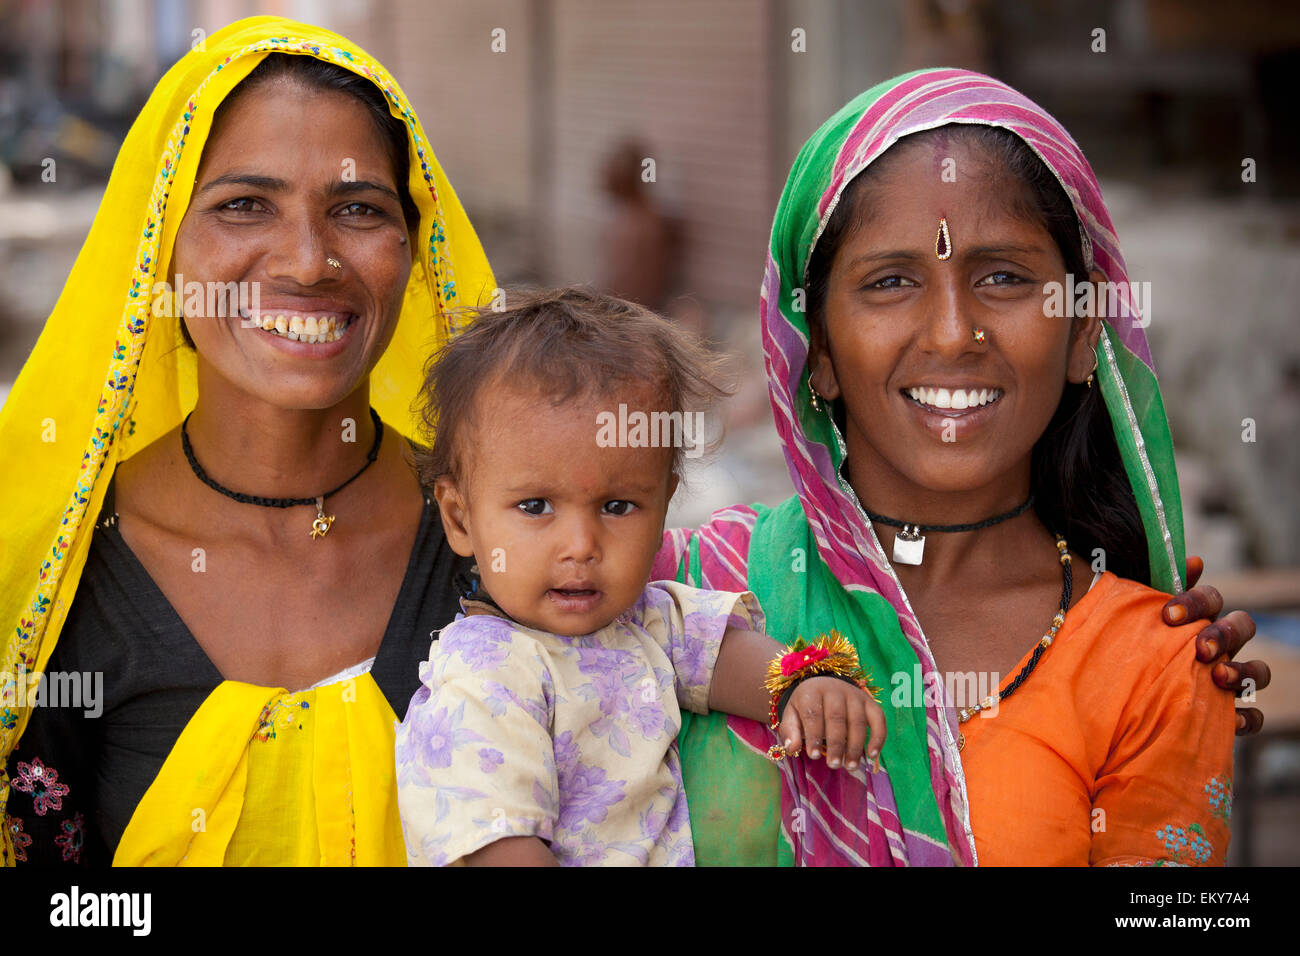 Two Women And A Baby Girl; Jaipur Rajasthan India Stock Photo